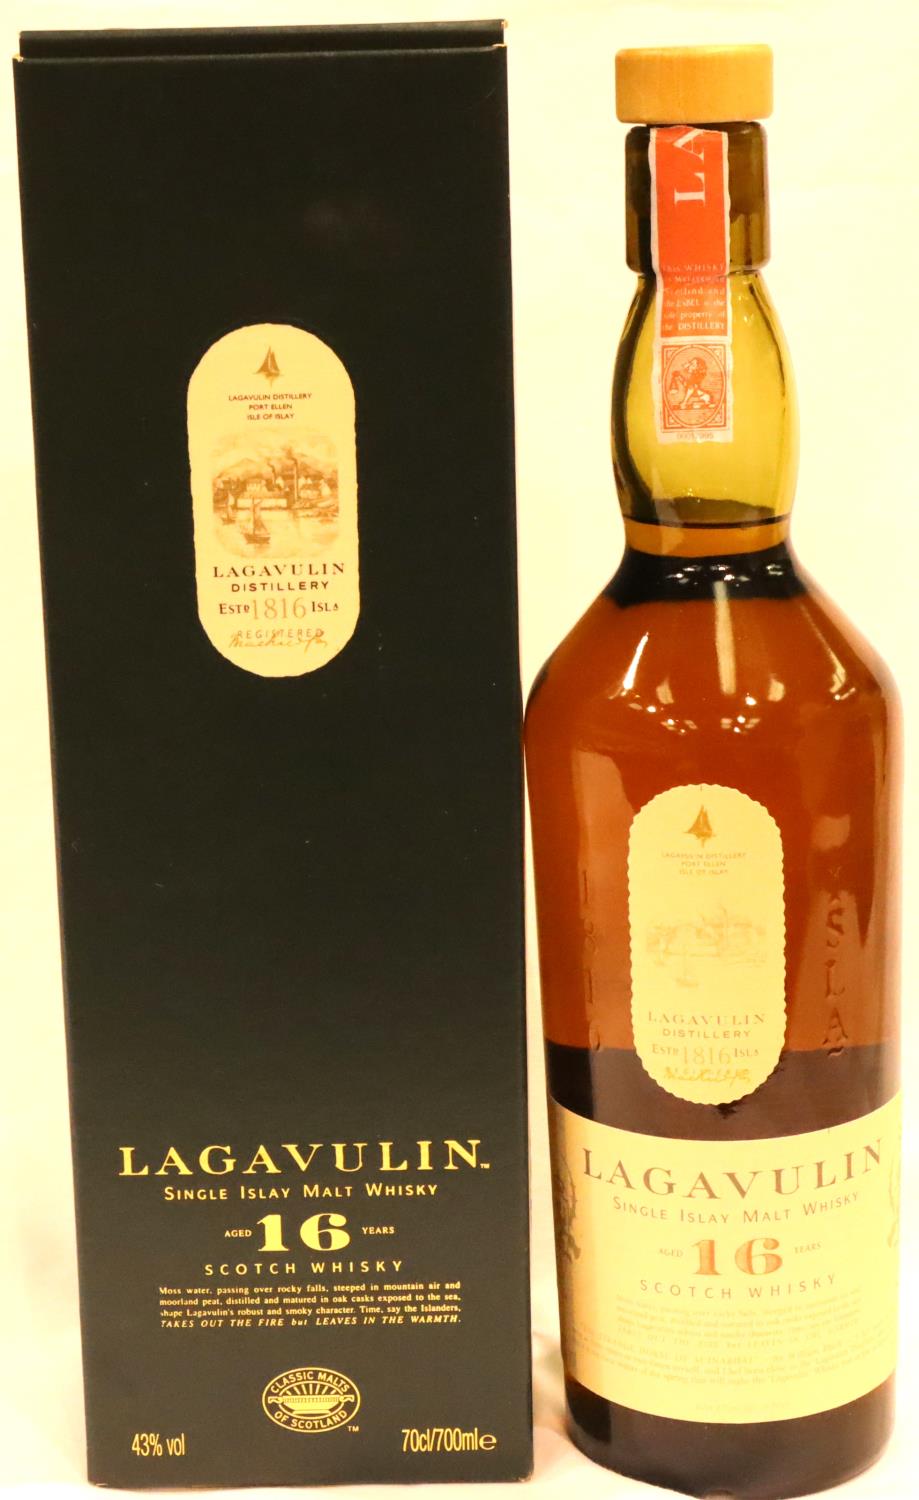 Bottle of Lagavulin 16 year old whisky. P&P Group 2 (£18+VAT for the first lot and £3+VAT for